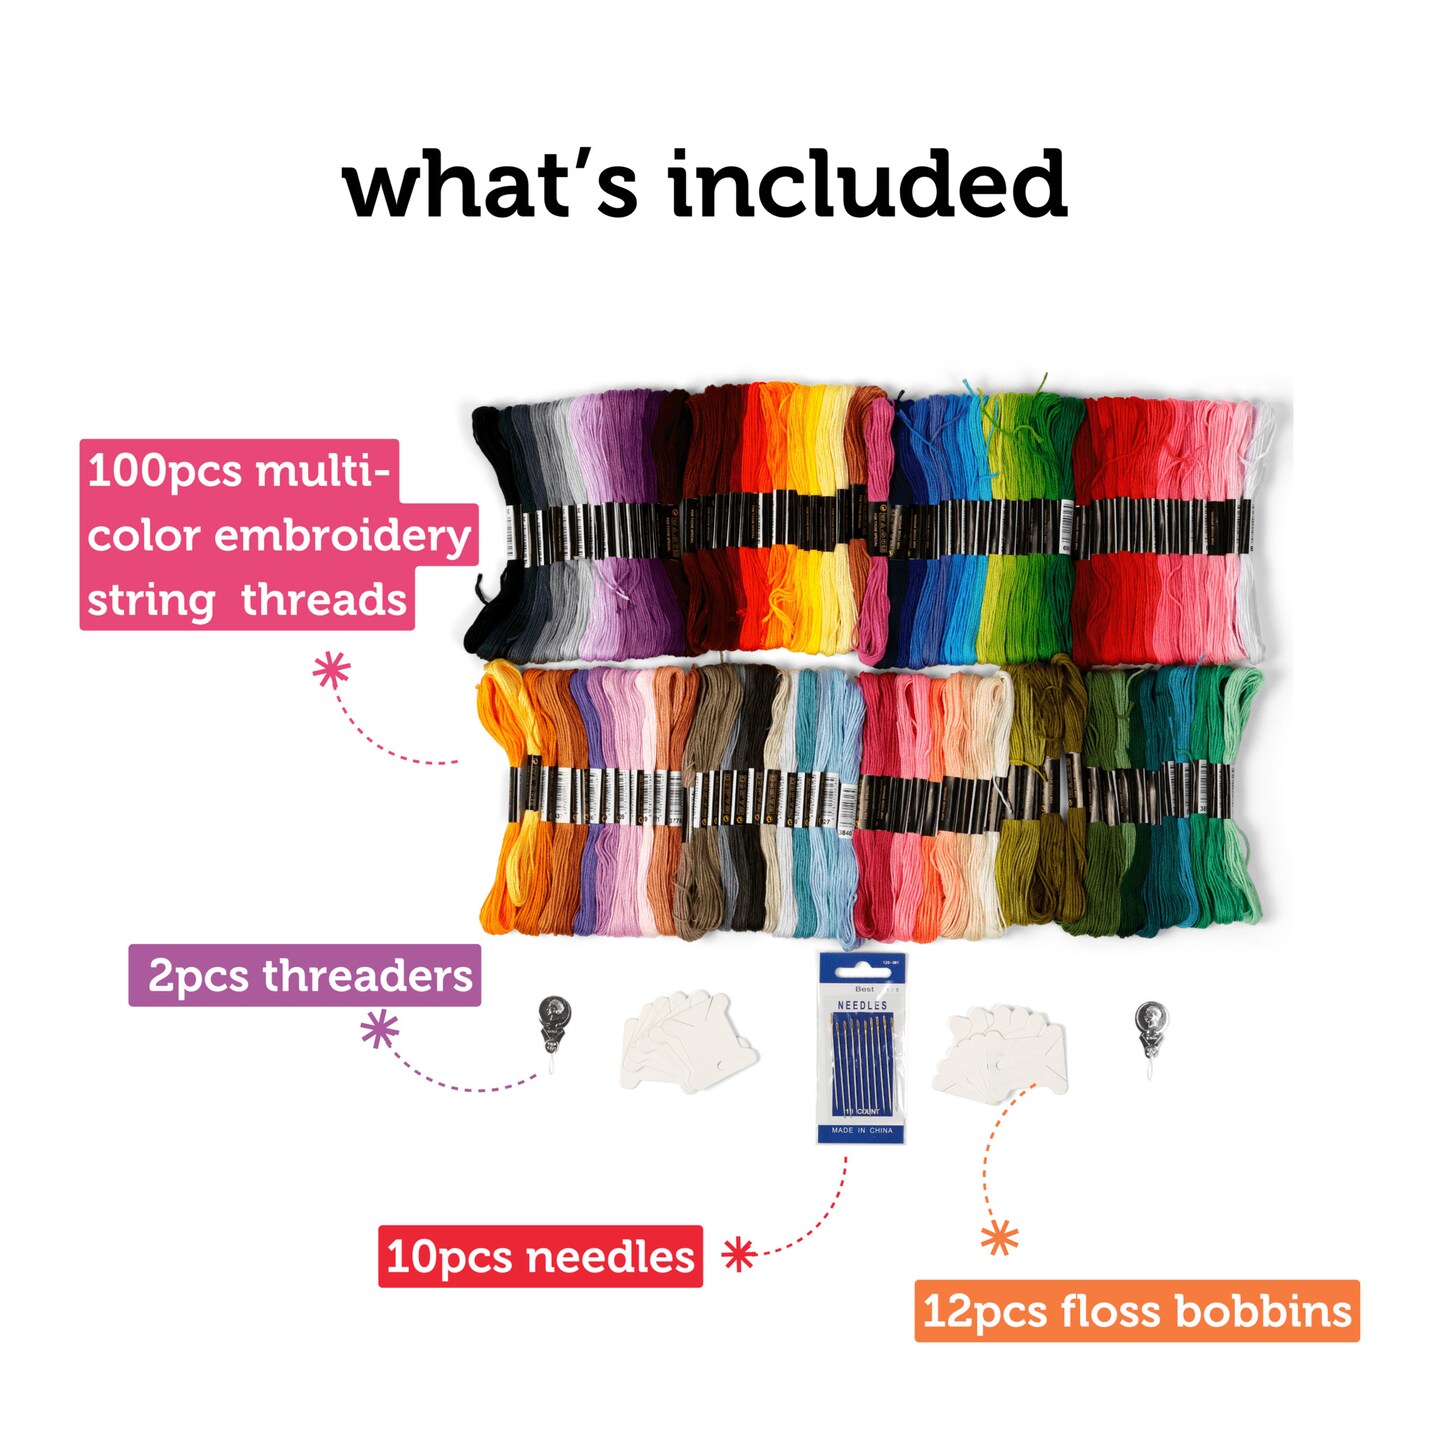 Incraftables Embroidery Thread for Bracelets 100pcs. Embroidery Floss for  Friendship Bracelets String Making. Embroidery Floss Kit w/ Needles,  Threaders & Yarn Tools. Best Cross Stitch Rainbow Skeins